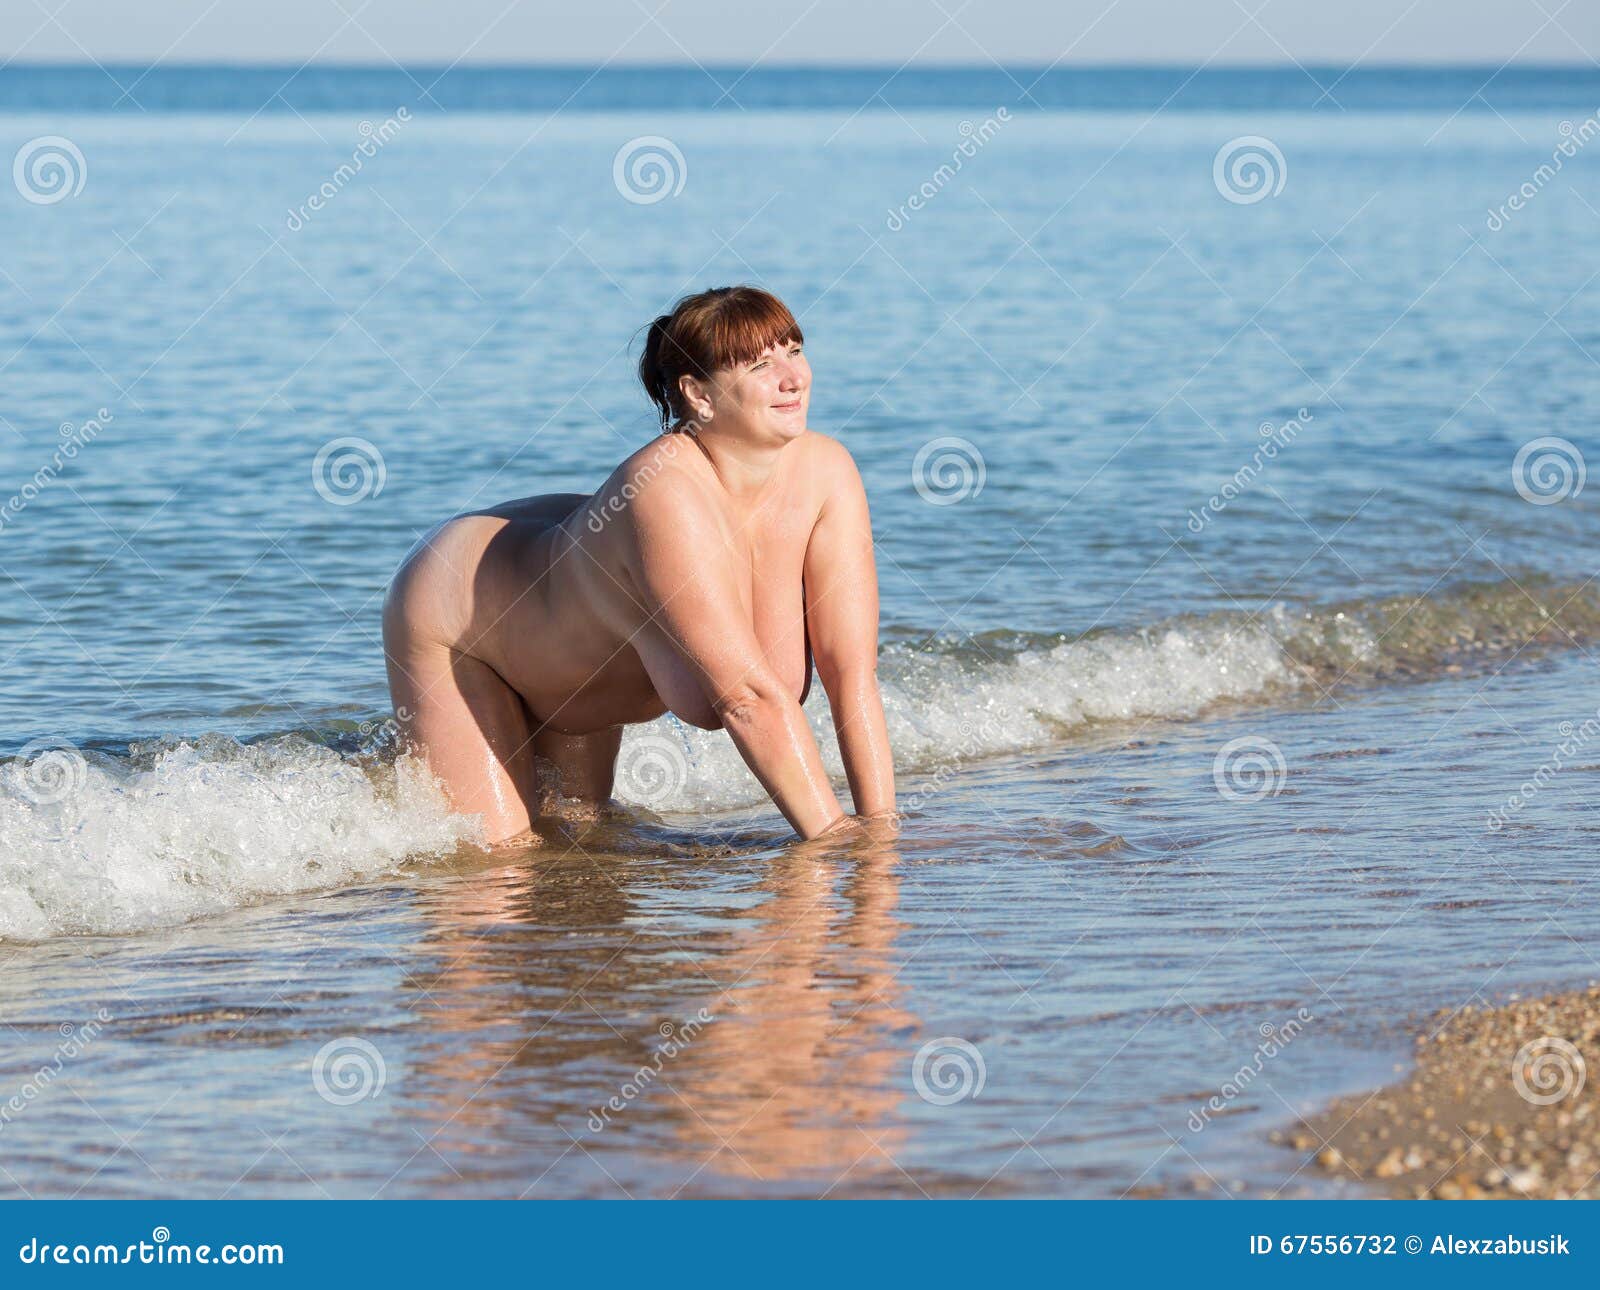 Fat Middle Aged Nudes - Overweight Middle Aged Woman at the Sea Stock Photo - Image of lifestyle,  naturist: 67556732